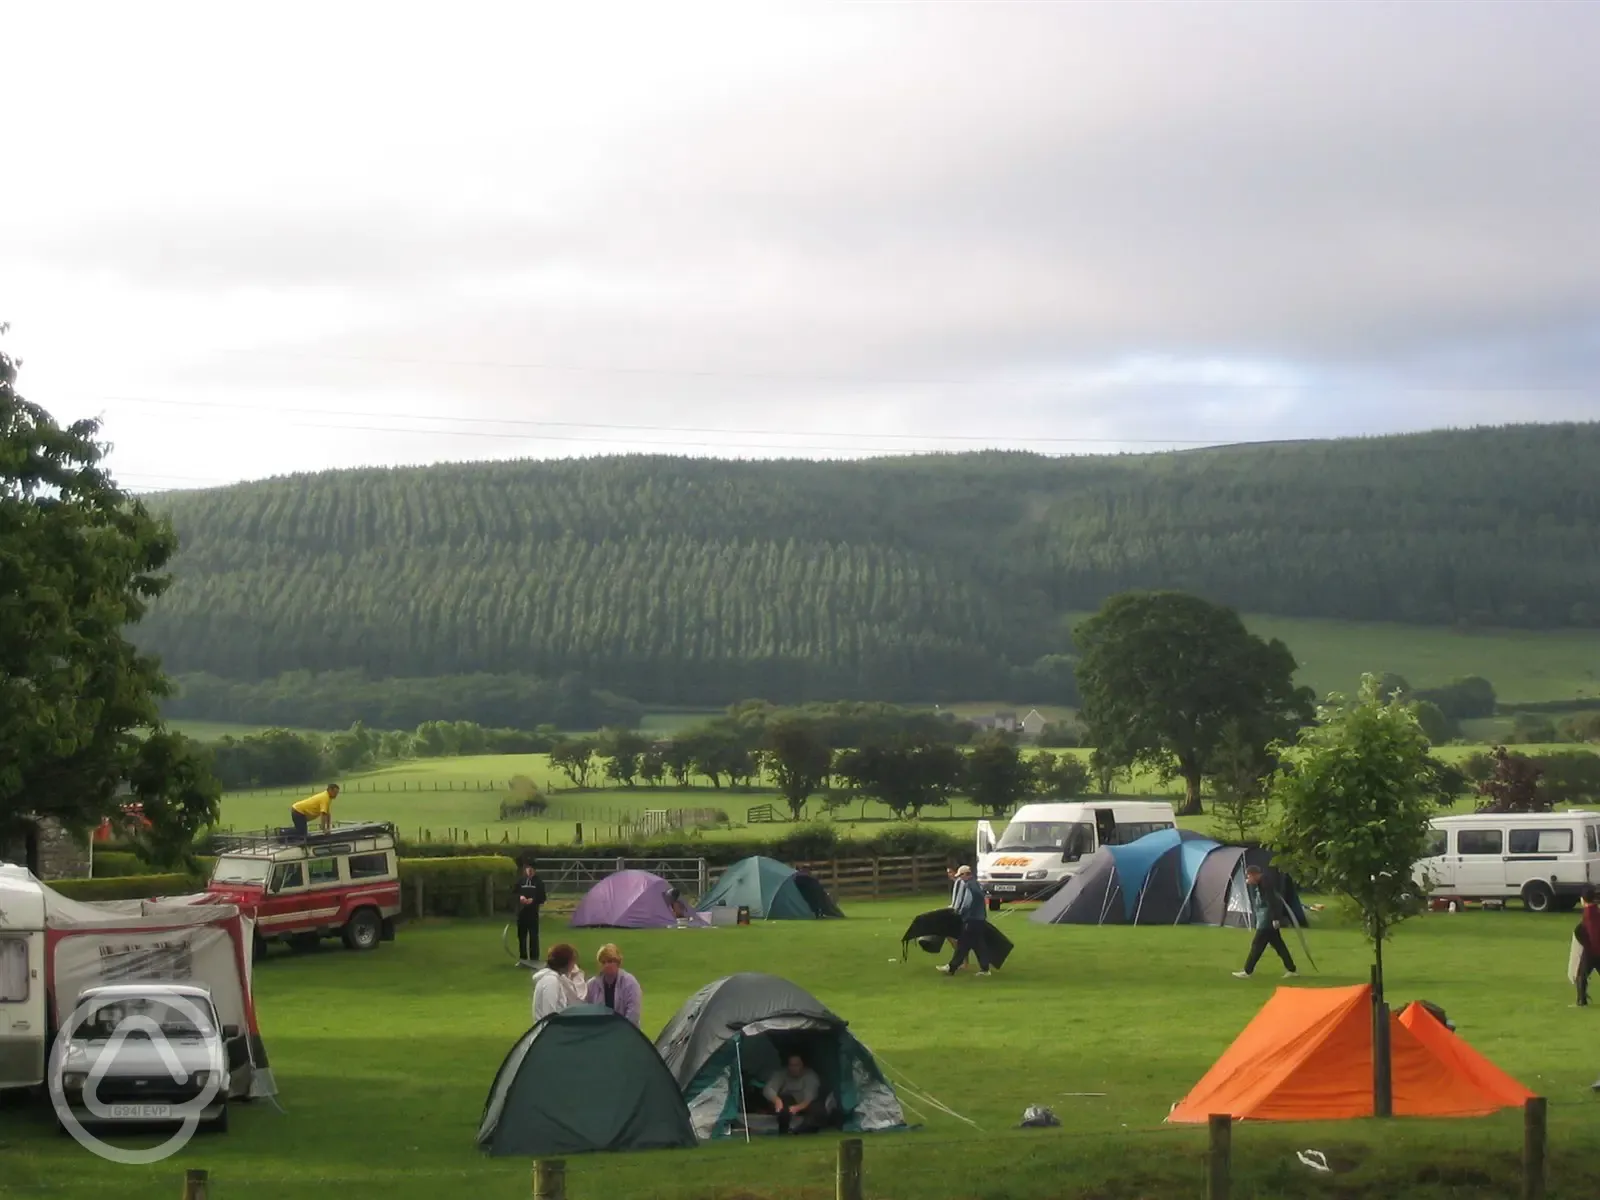 Our campsite easily accessible from the road with Llandegla Forest in the backgroun